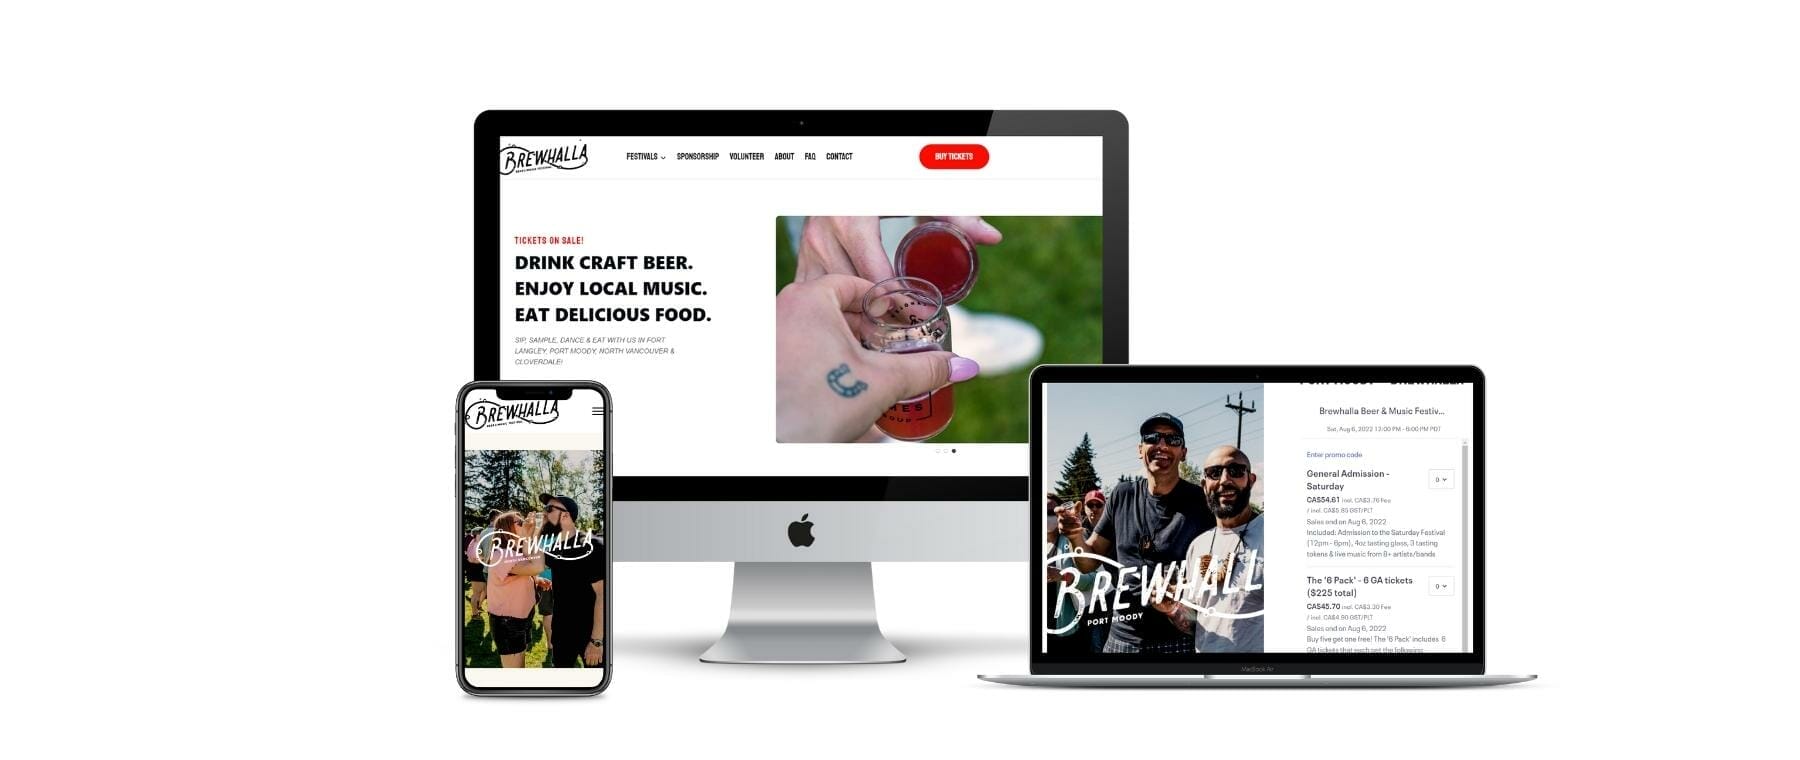 Examples of Brewhalls website on desktop, laptop and smartphone